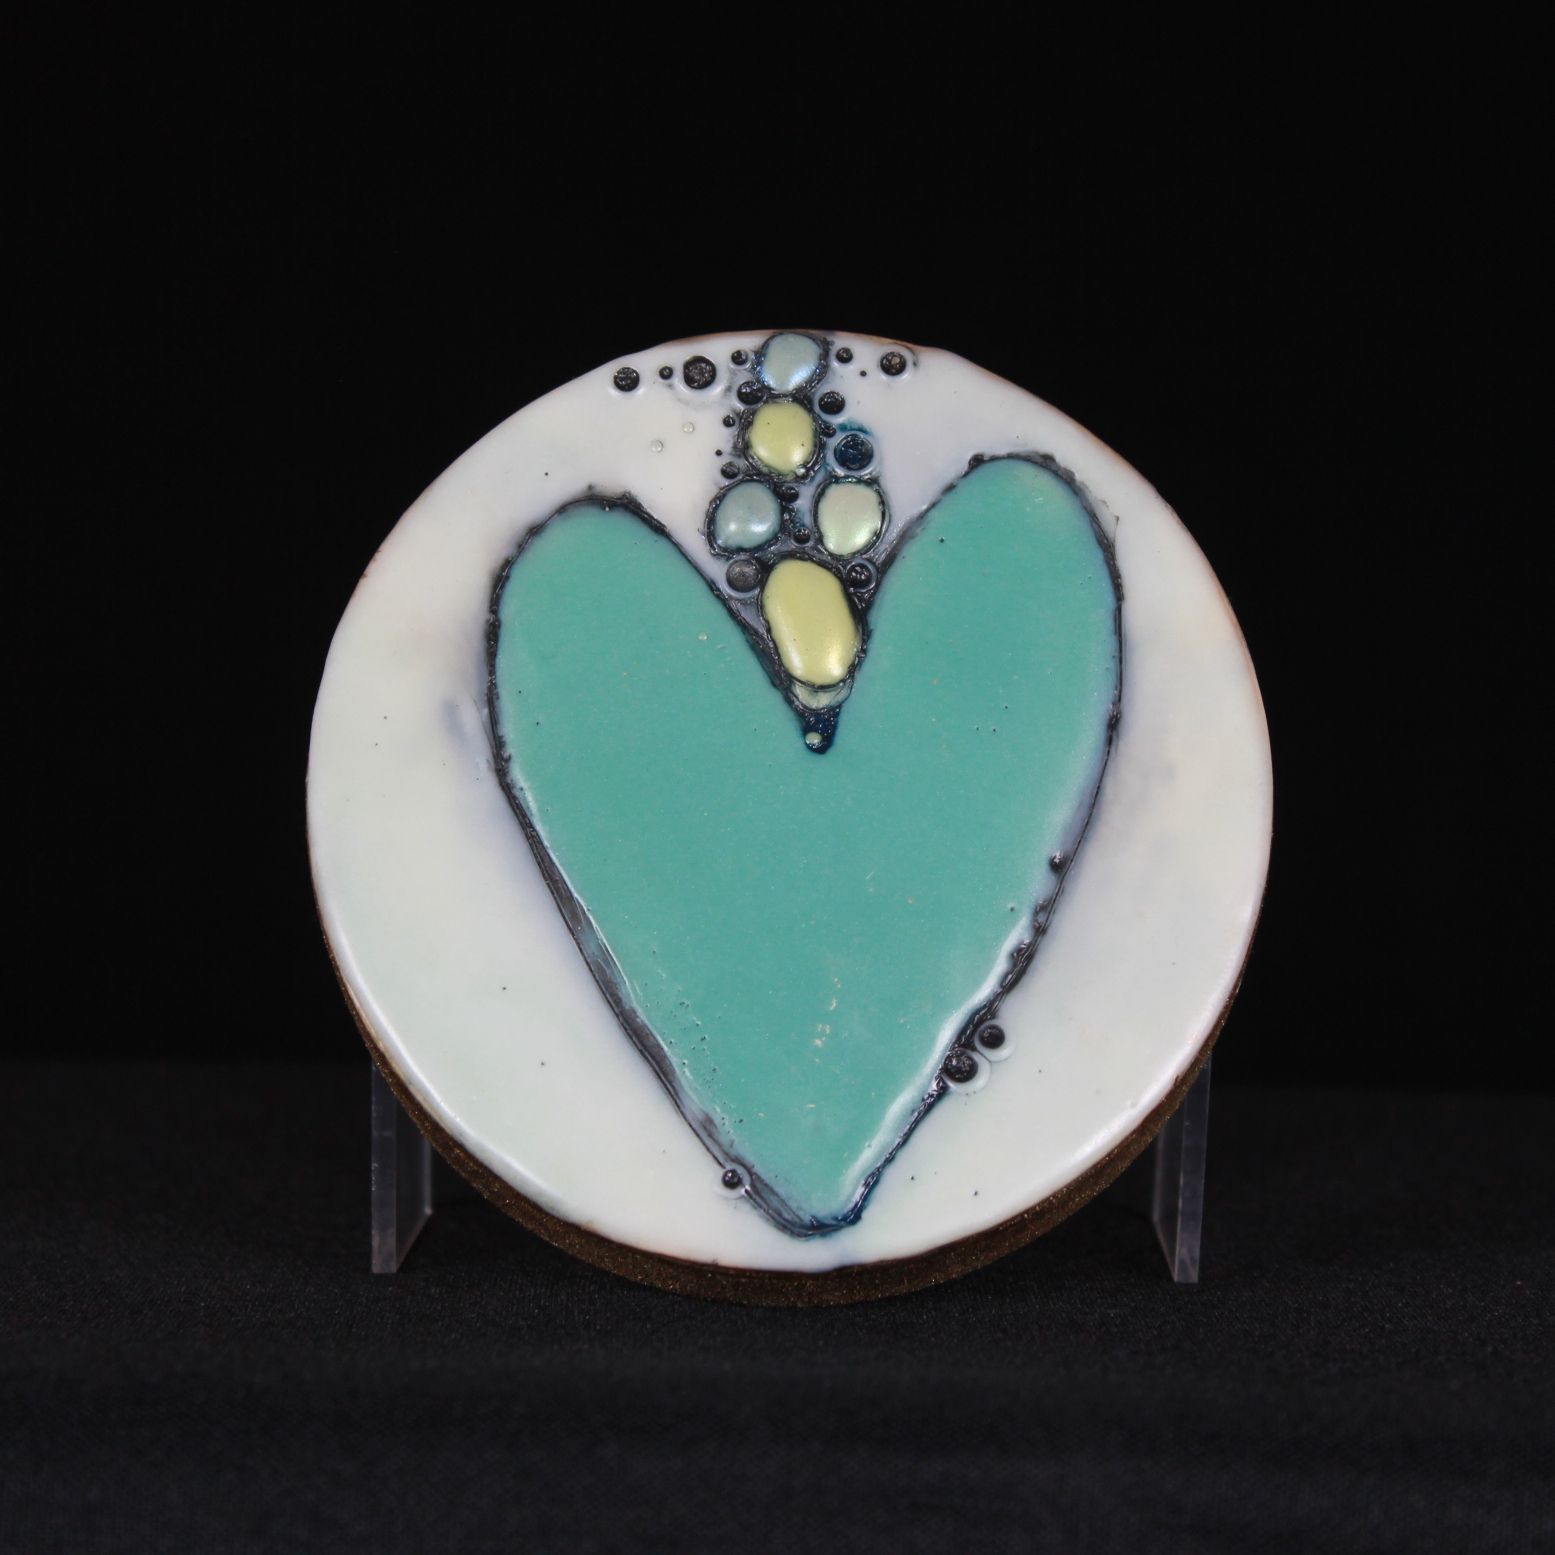 Circular Teal Heart with White